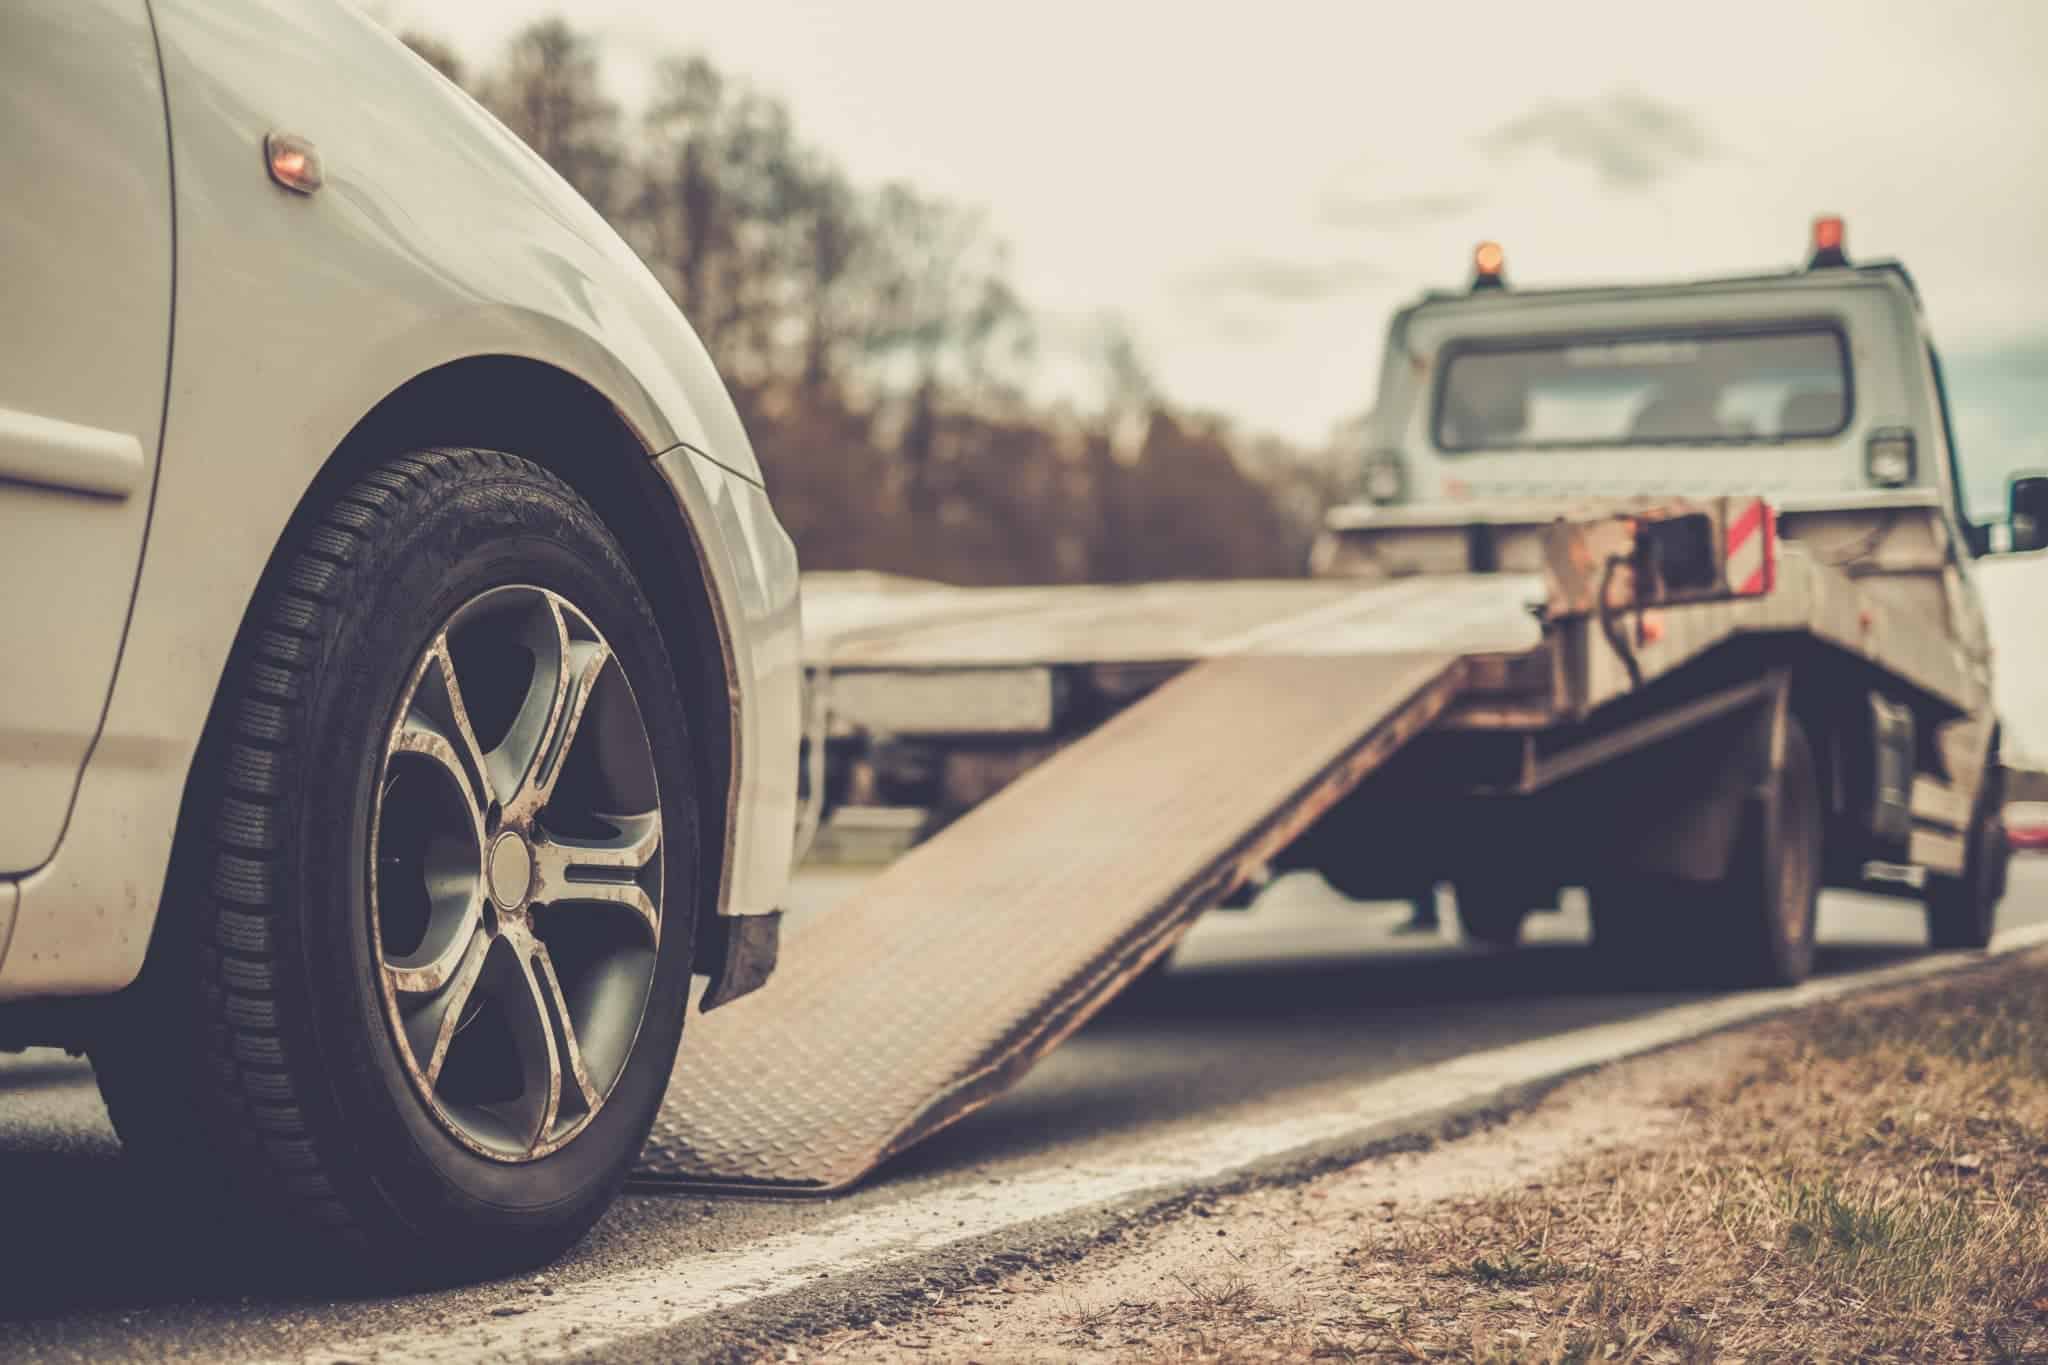 5 Things to do When Your Car Gets Towed in California - Blog